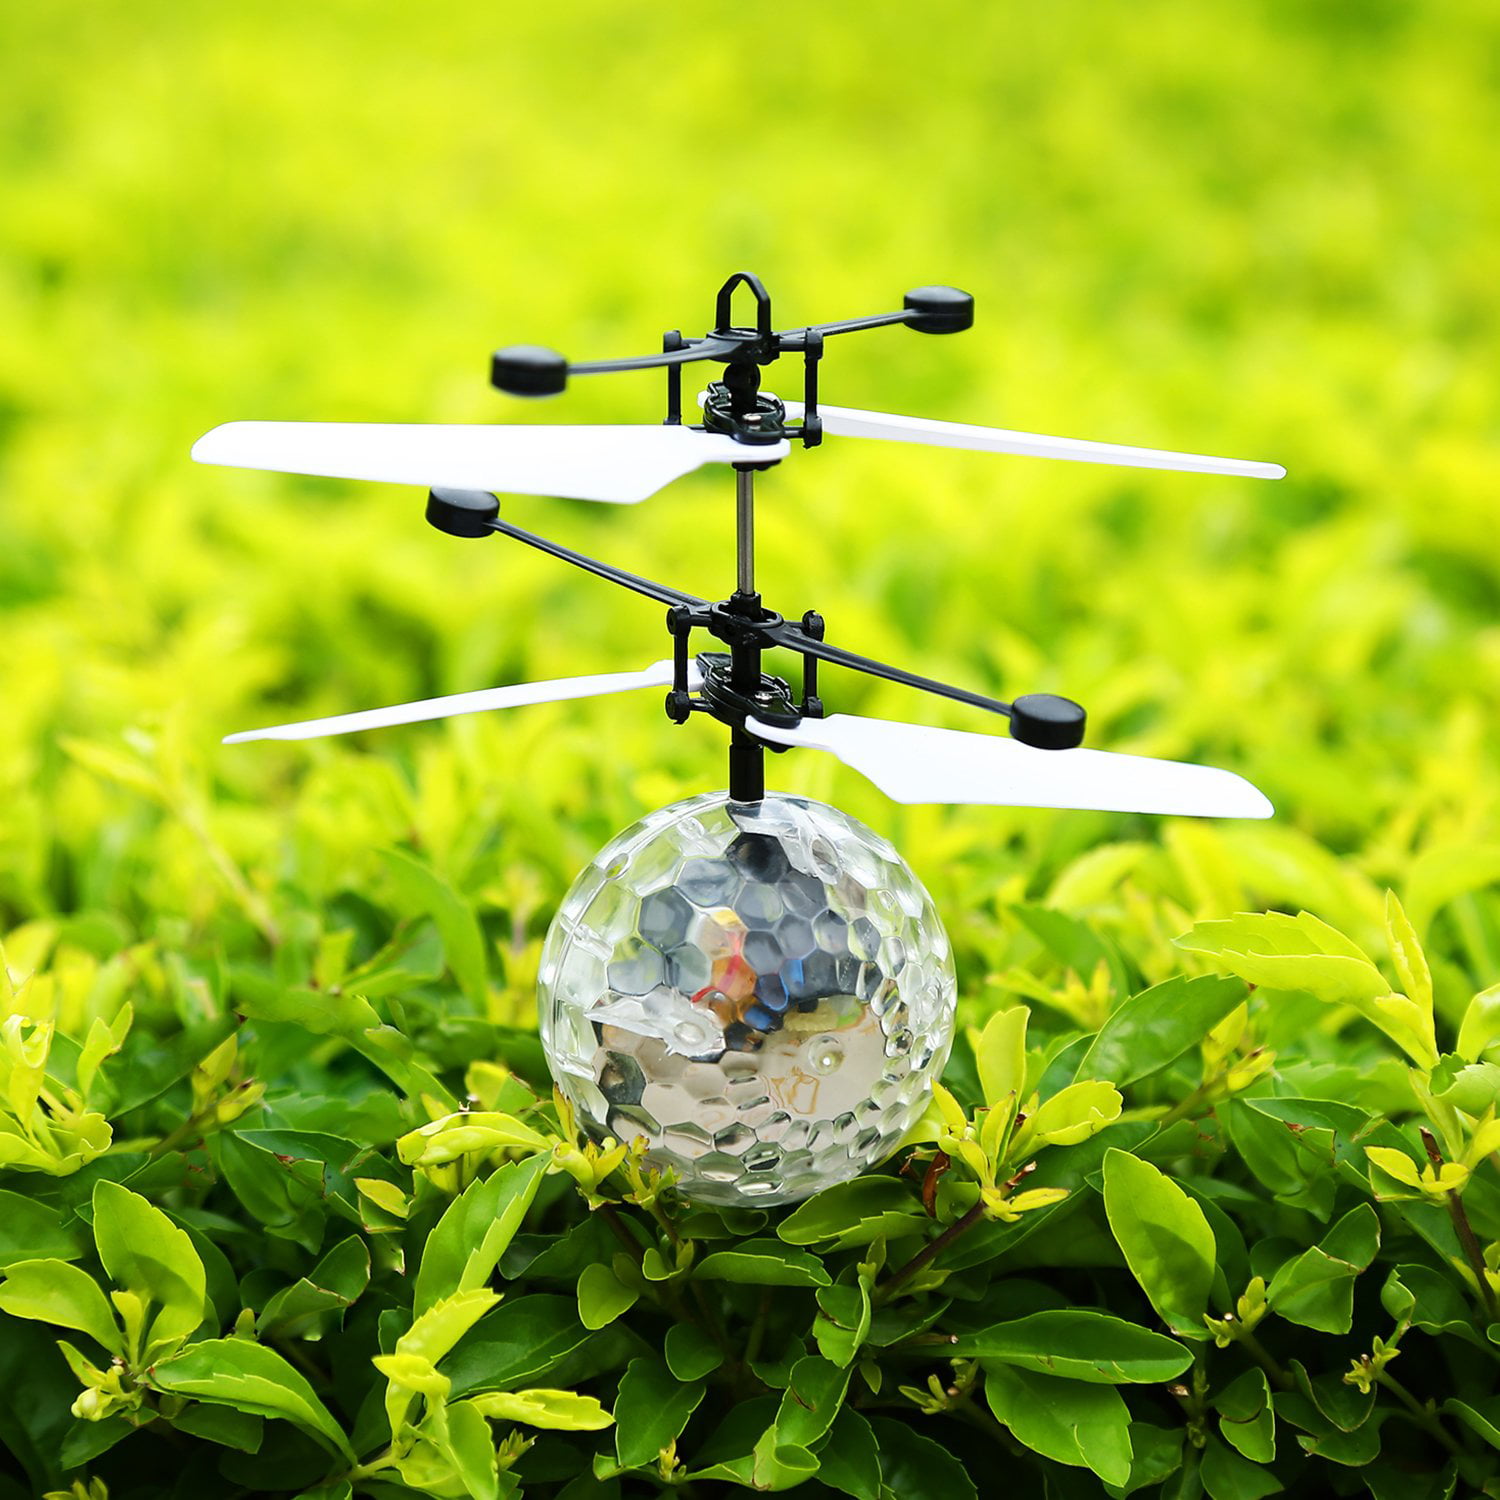 BAIHUAXIN Magic Electric Flying Ball Helicopter Infrared Sensor Kids LED Light Toy Drone with Shinning LED Lights Fun Gadgets for Boys Girls Kids Teenagers Adults Indoor Outdoor Garden Games 